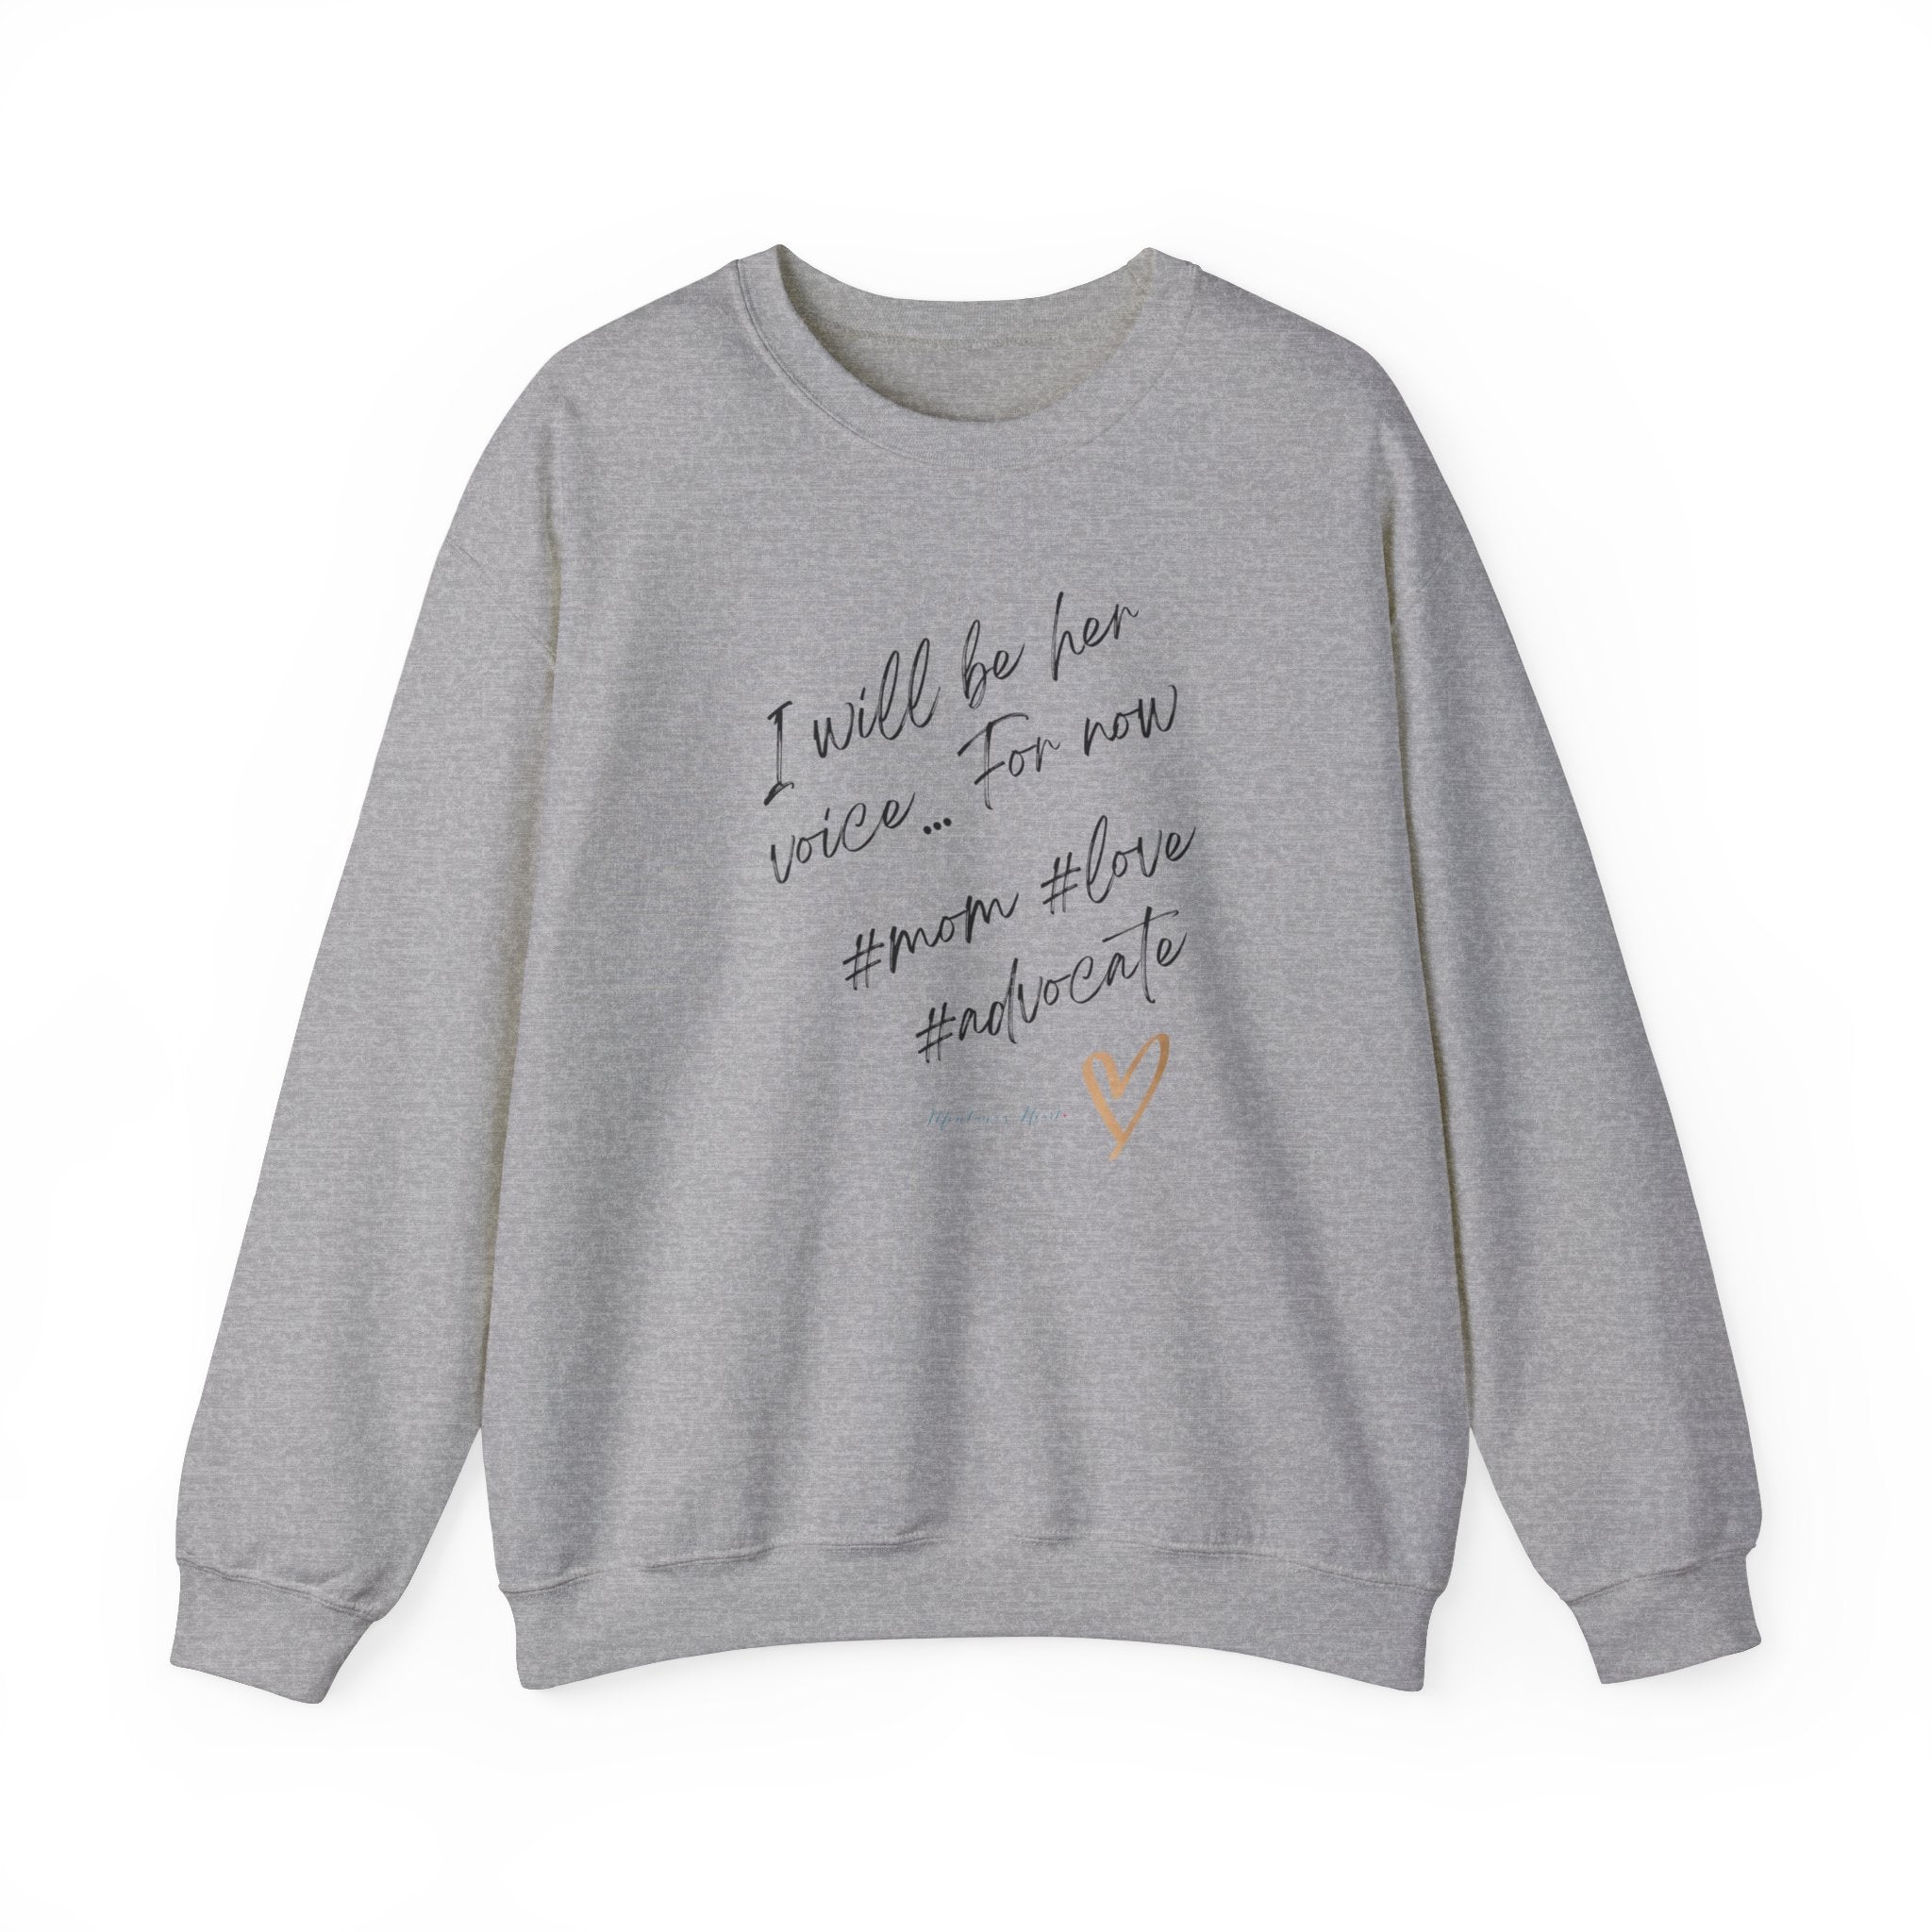 I will be her voice for now, Mom, Love , Advocate, Ladies sweatshirt